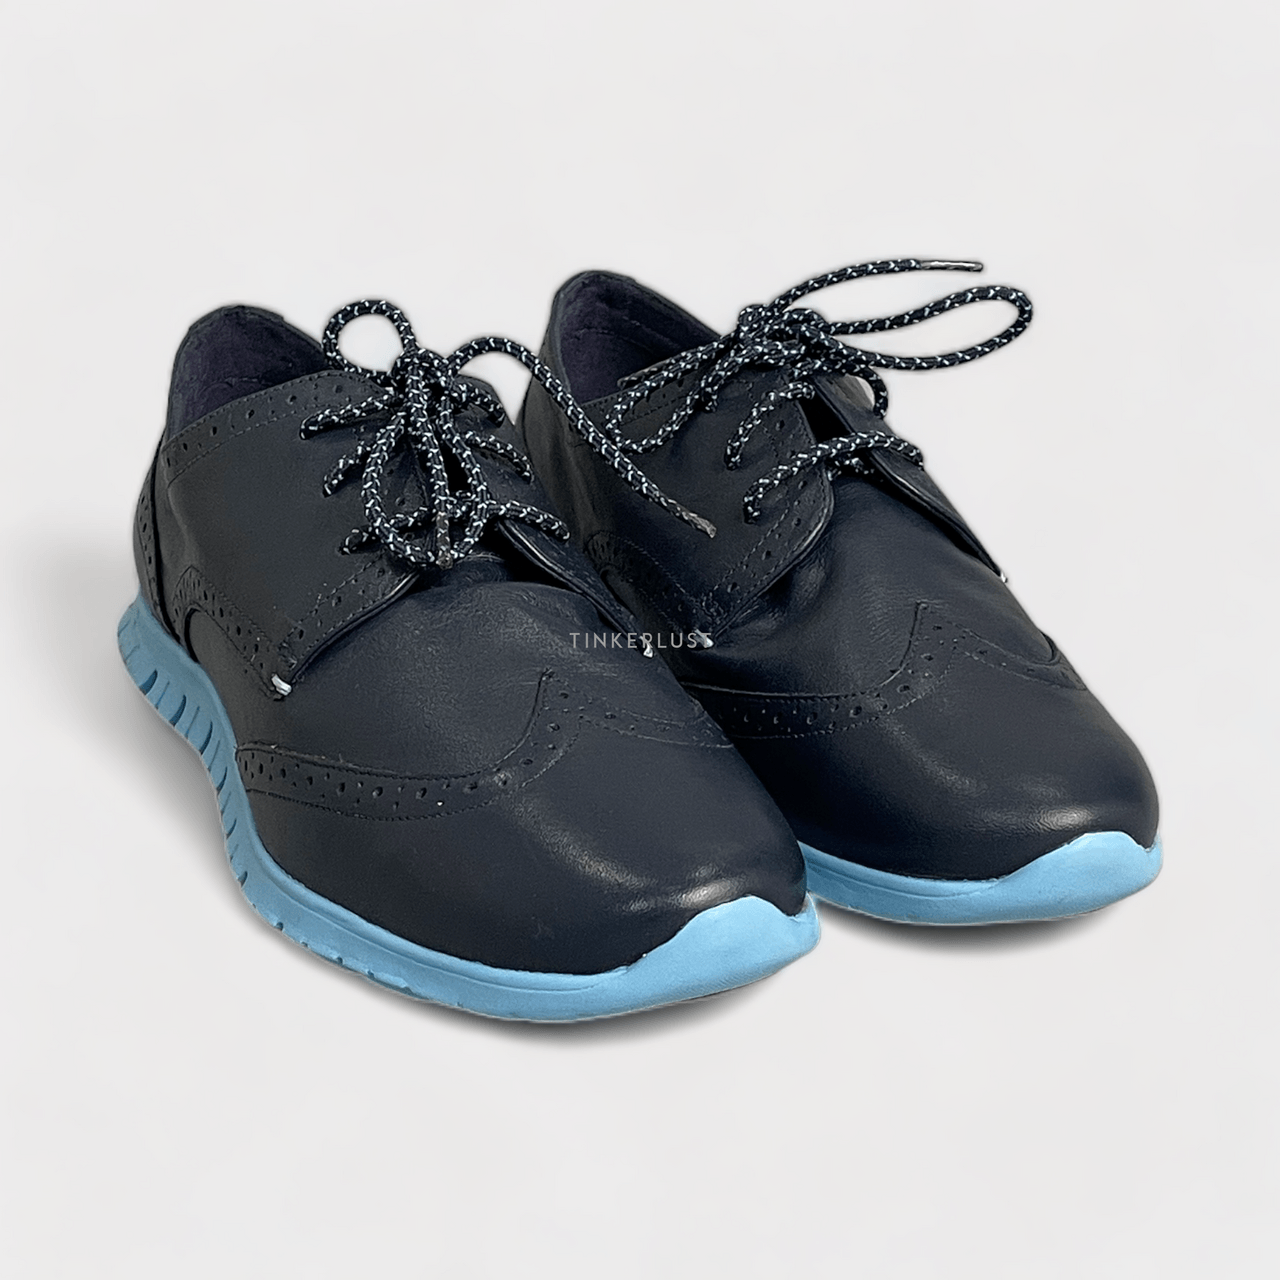 Cole Haan Zero Grand Navy Oxford Shoes 